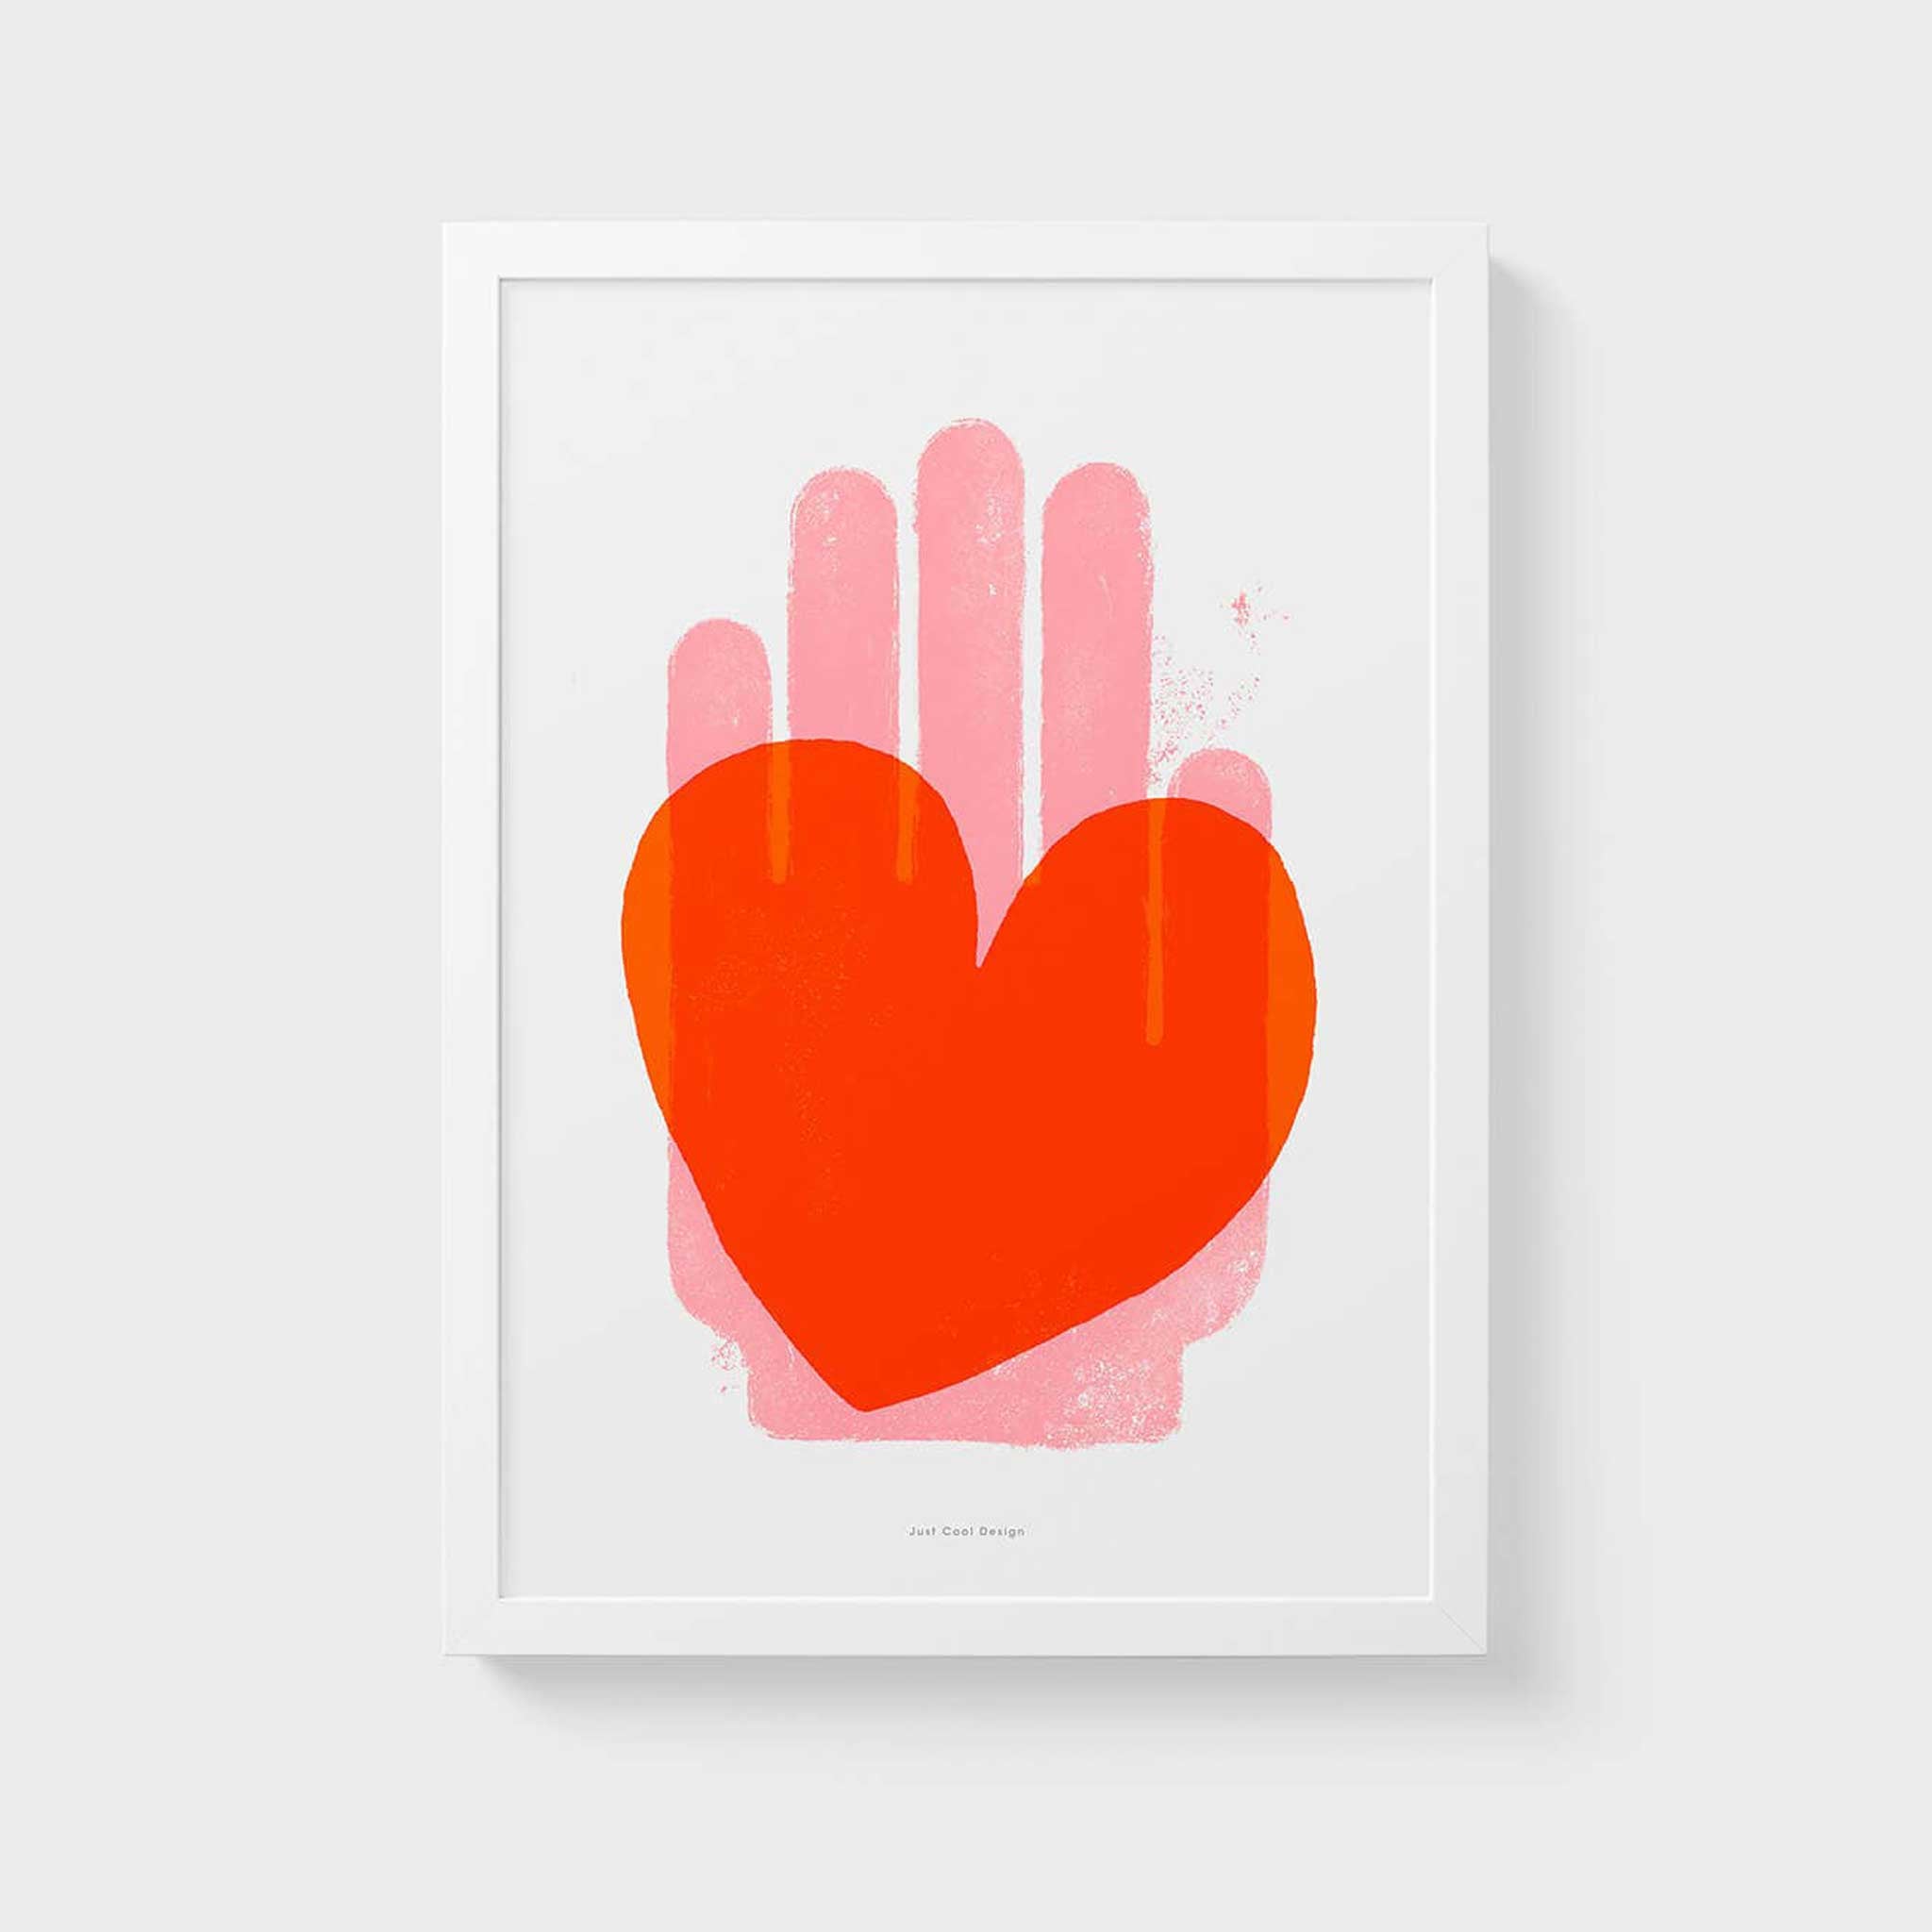 RED HEART | Graphic POSTER | A3 Format | Just Another Cool Design